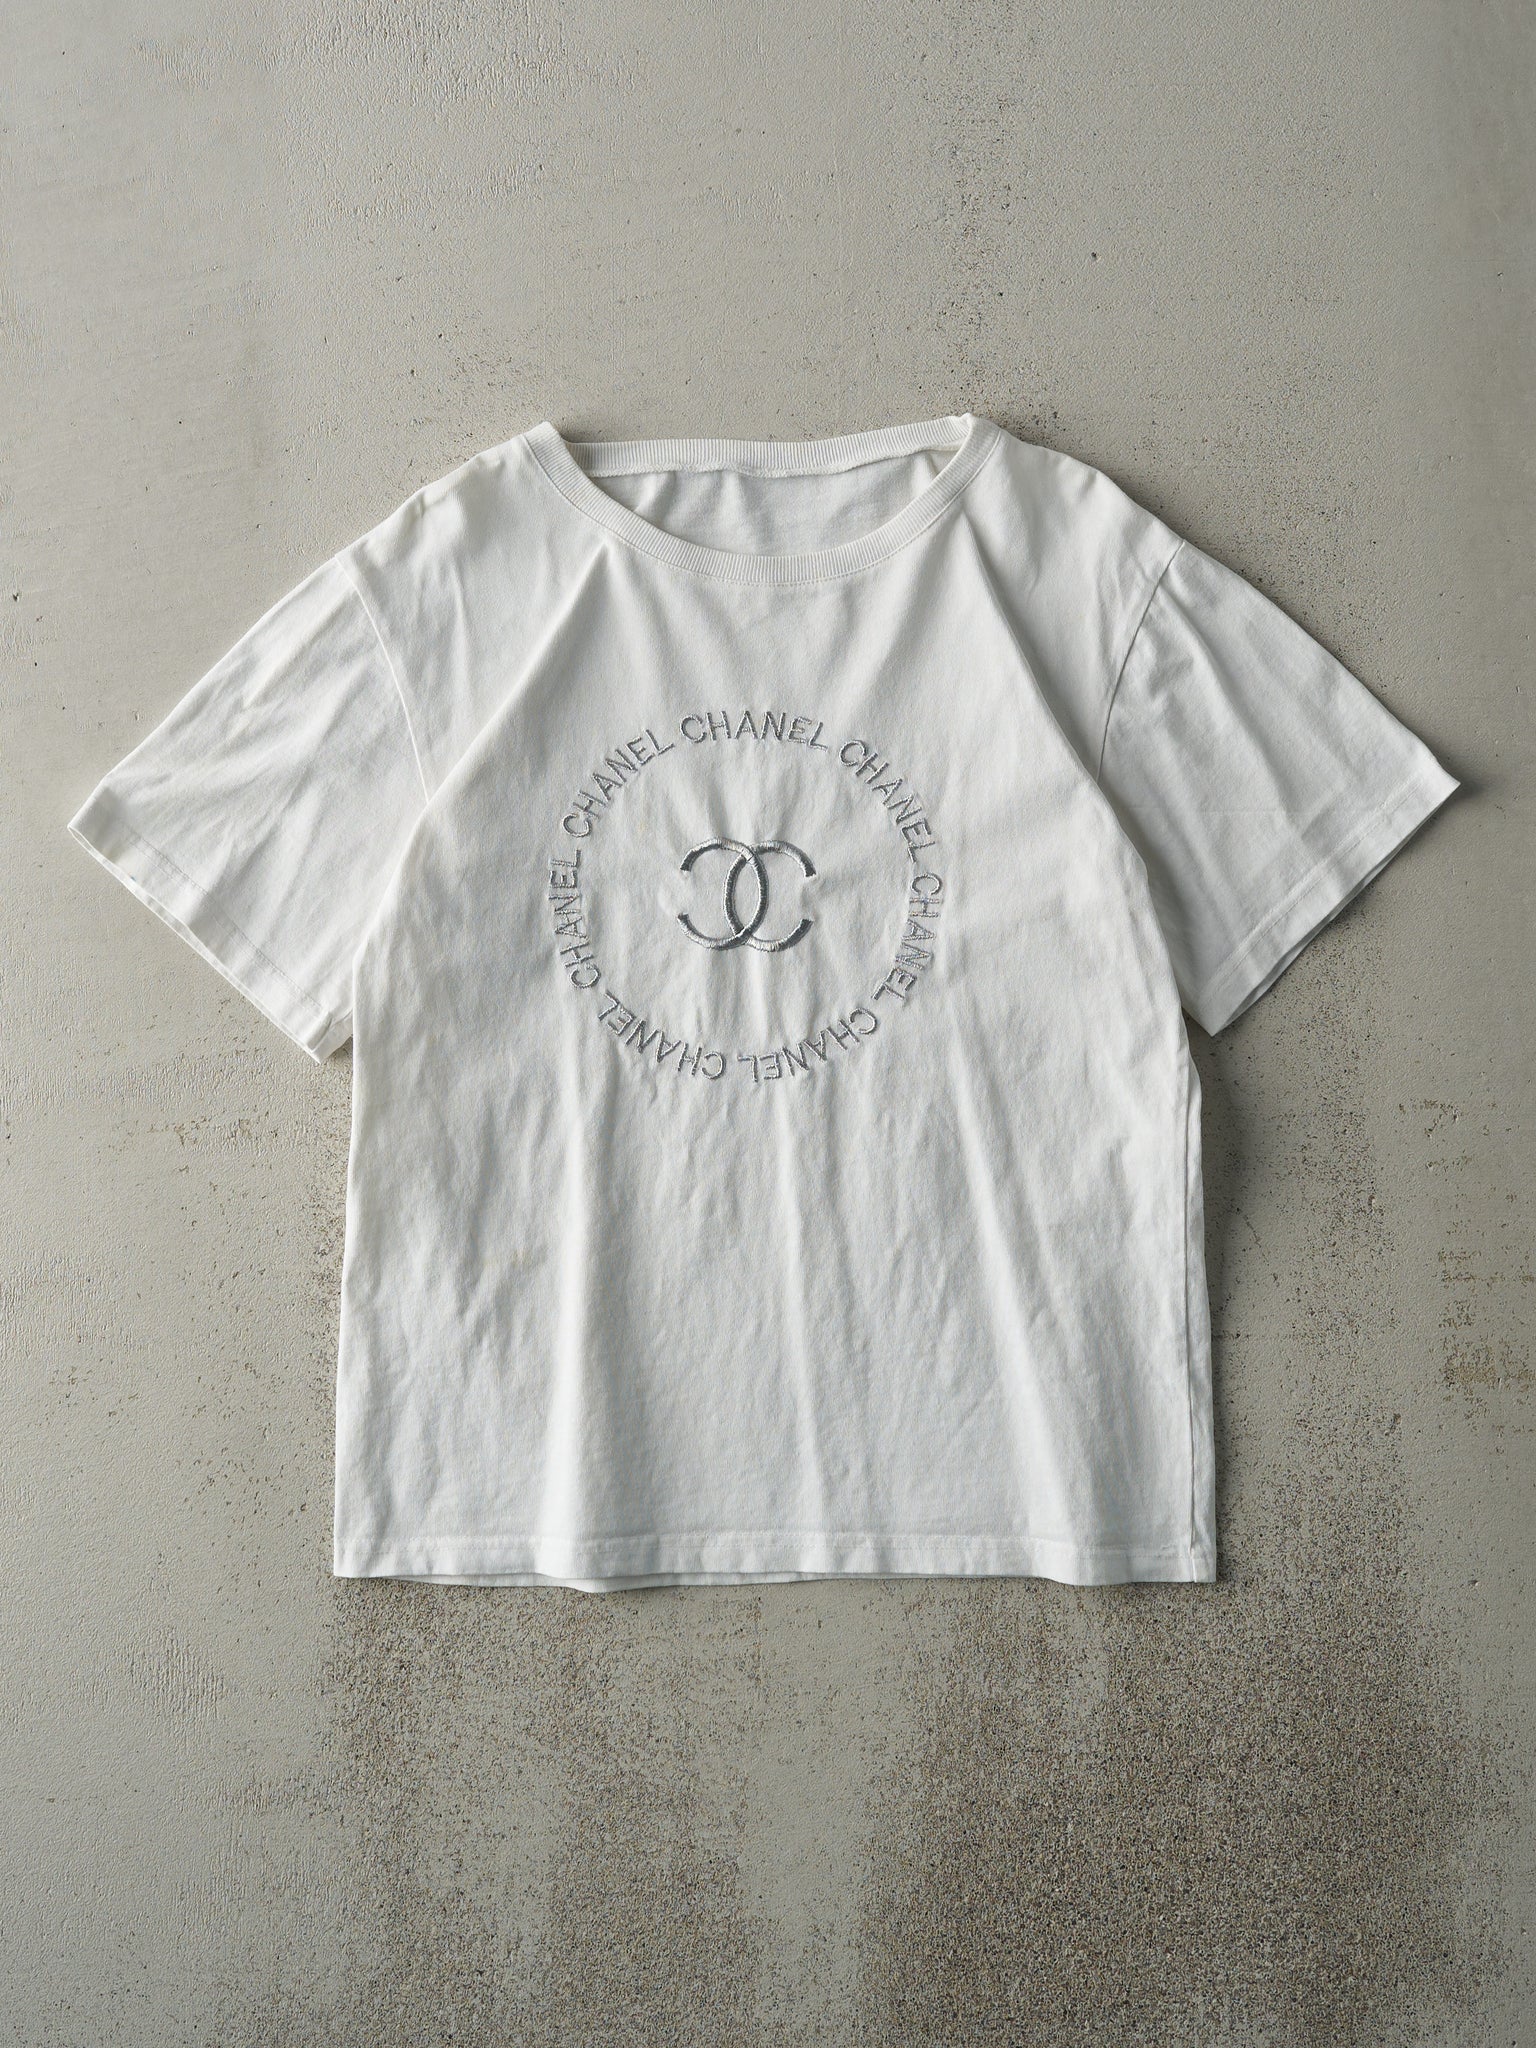 Vintage Y2K White Bootleg Embroidered Chanel Tee (S)